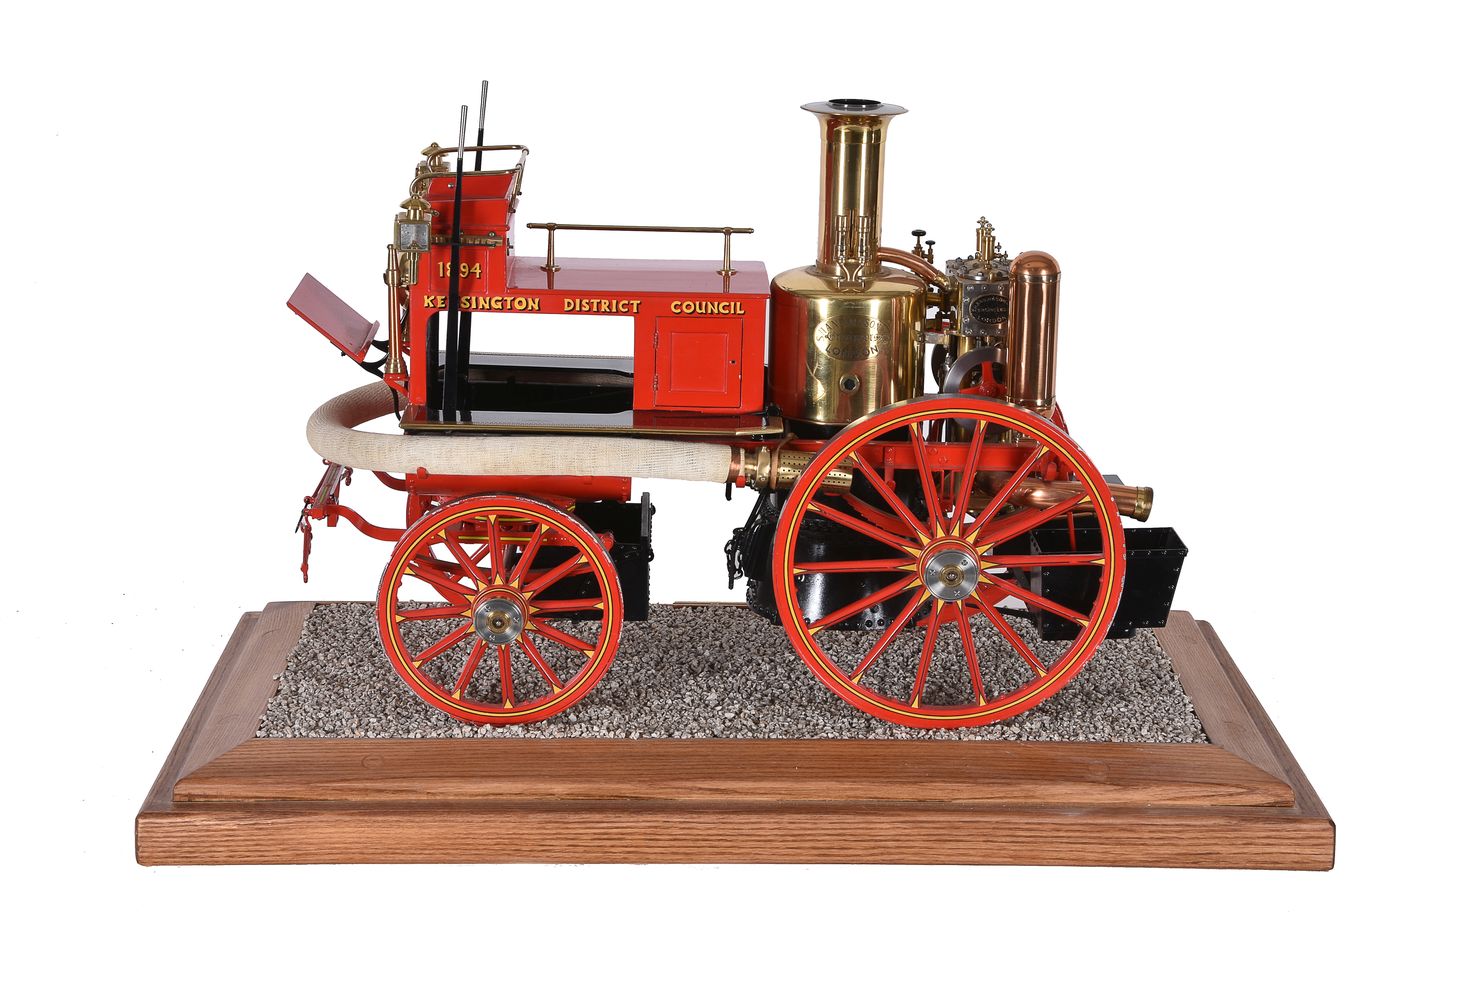 Westbury Building a Model Steam Engine from Castings by Edgar T 